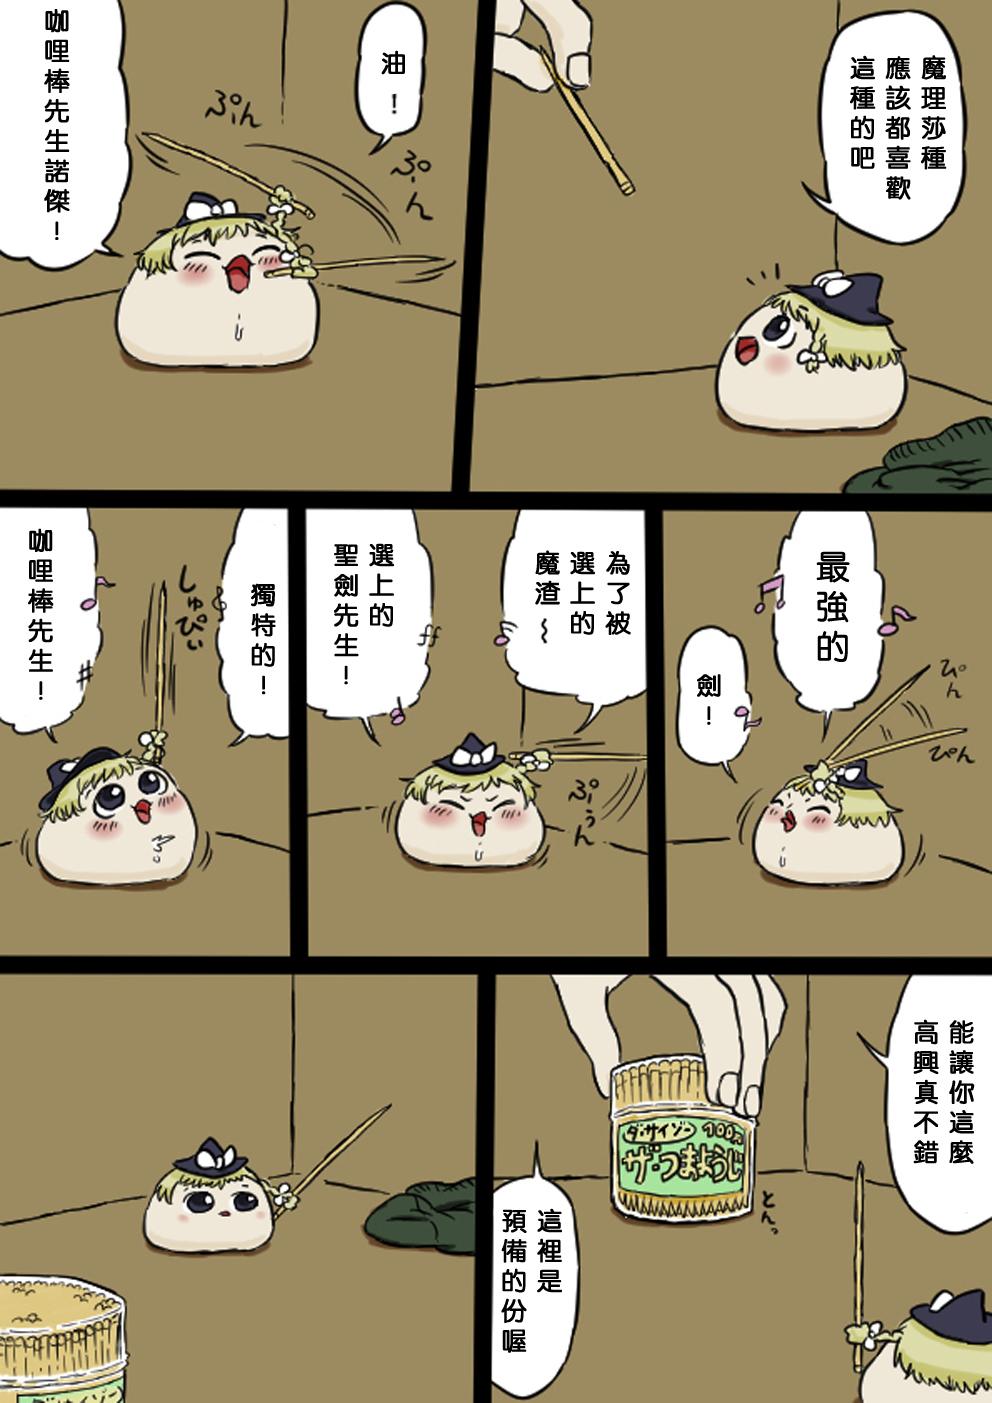 Comedor すべてをてにいれたまりちゃ（Chinese） - Touhou project Closeups - Page 6